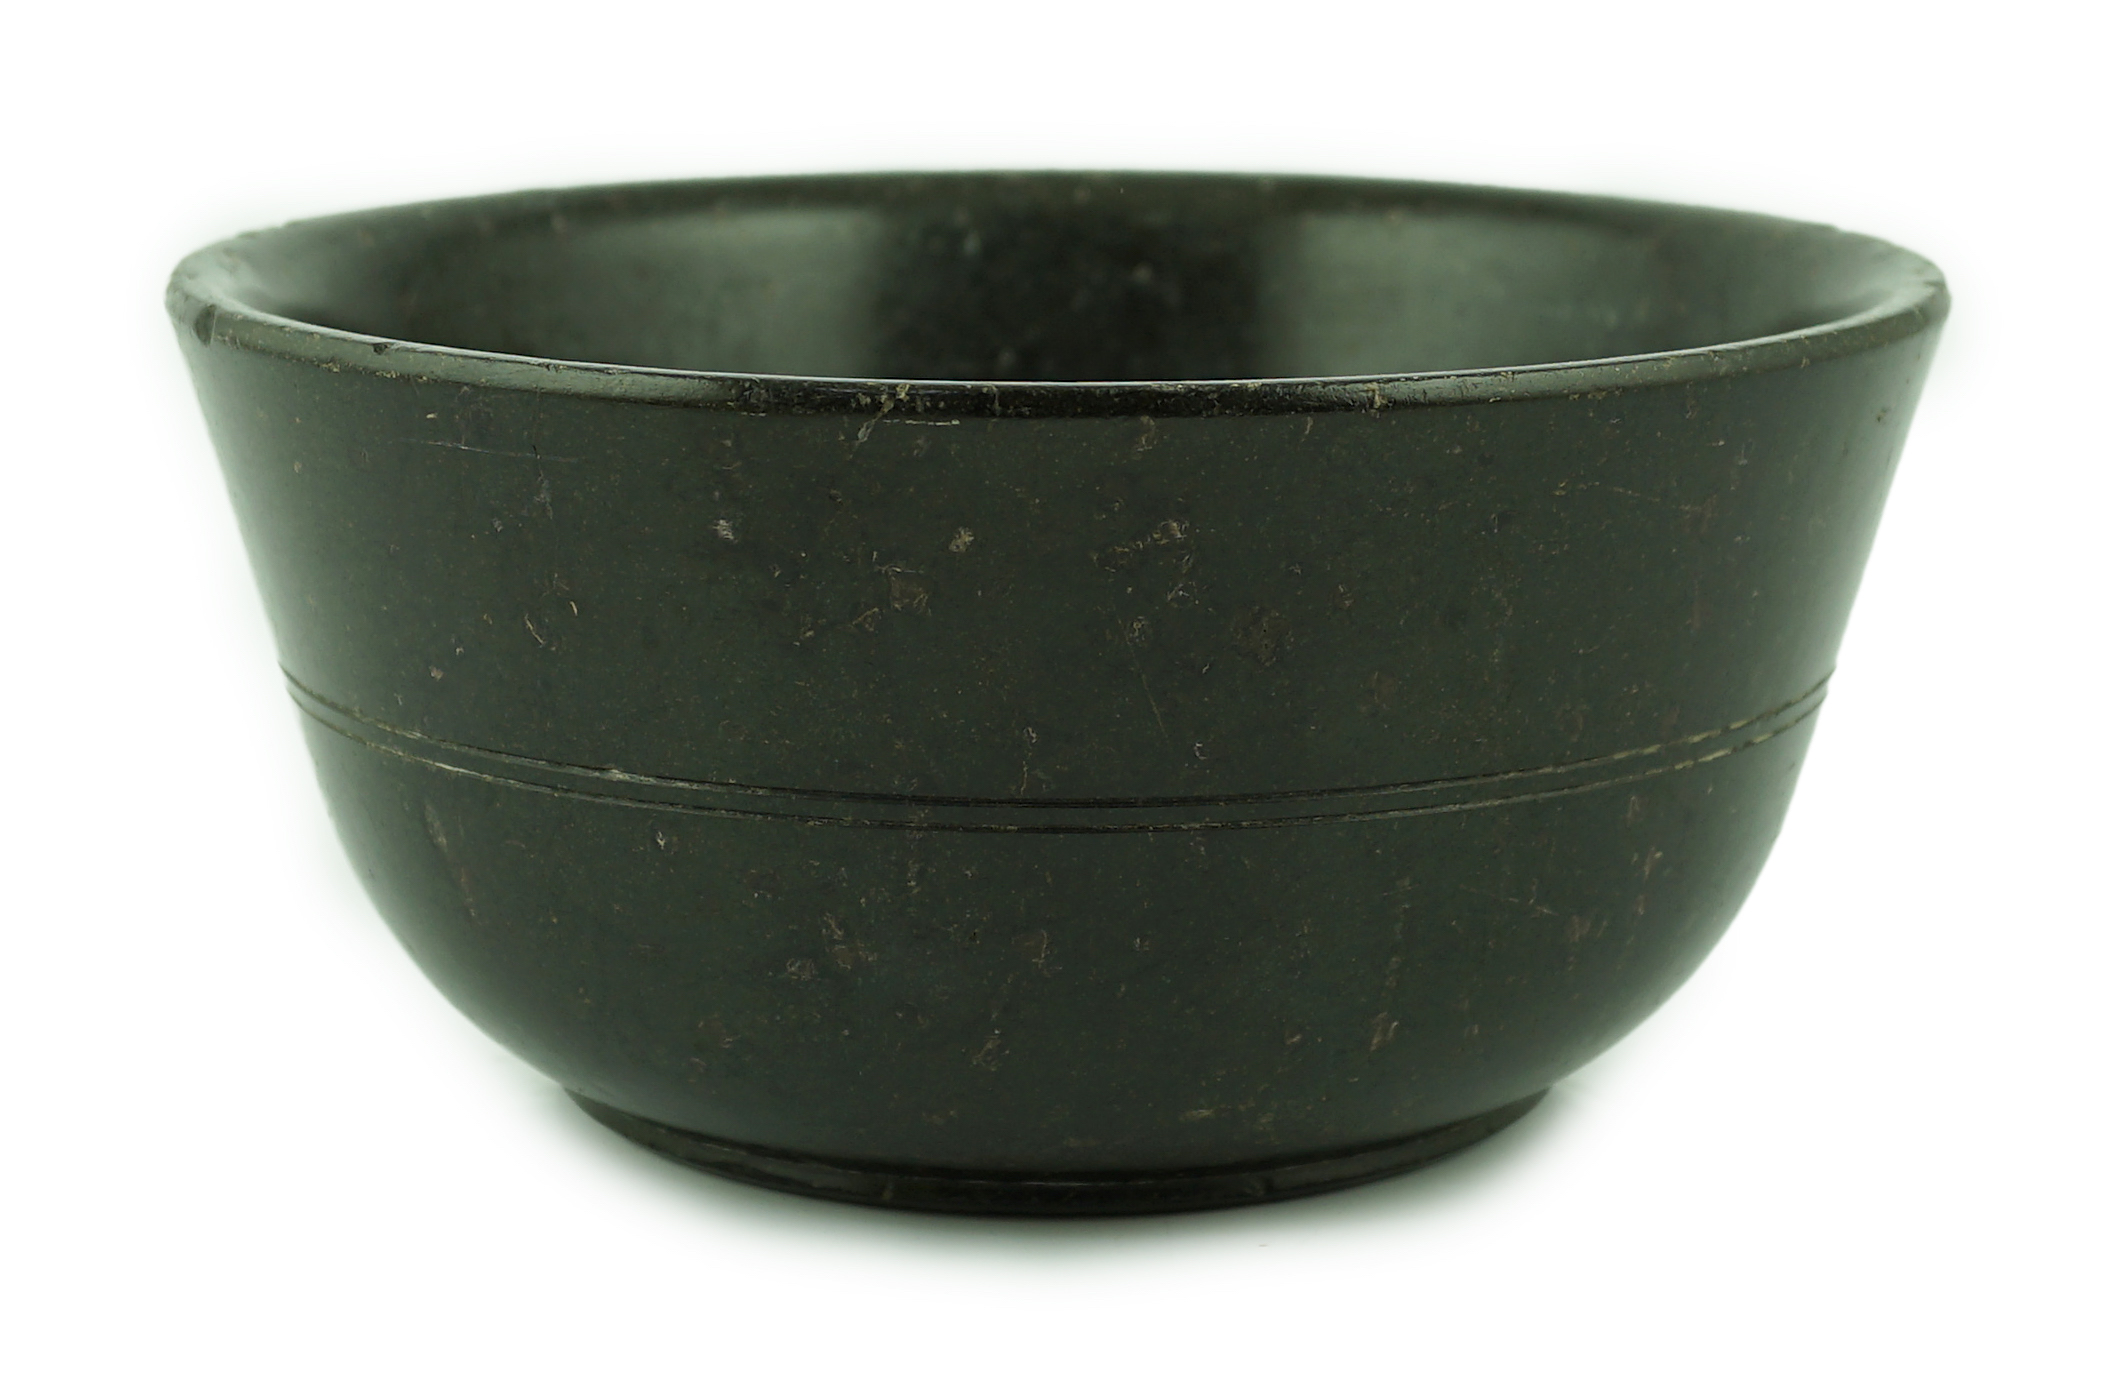 A Chinese snakeskin soapstone bowl, Tang dynasty or later